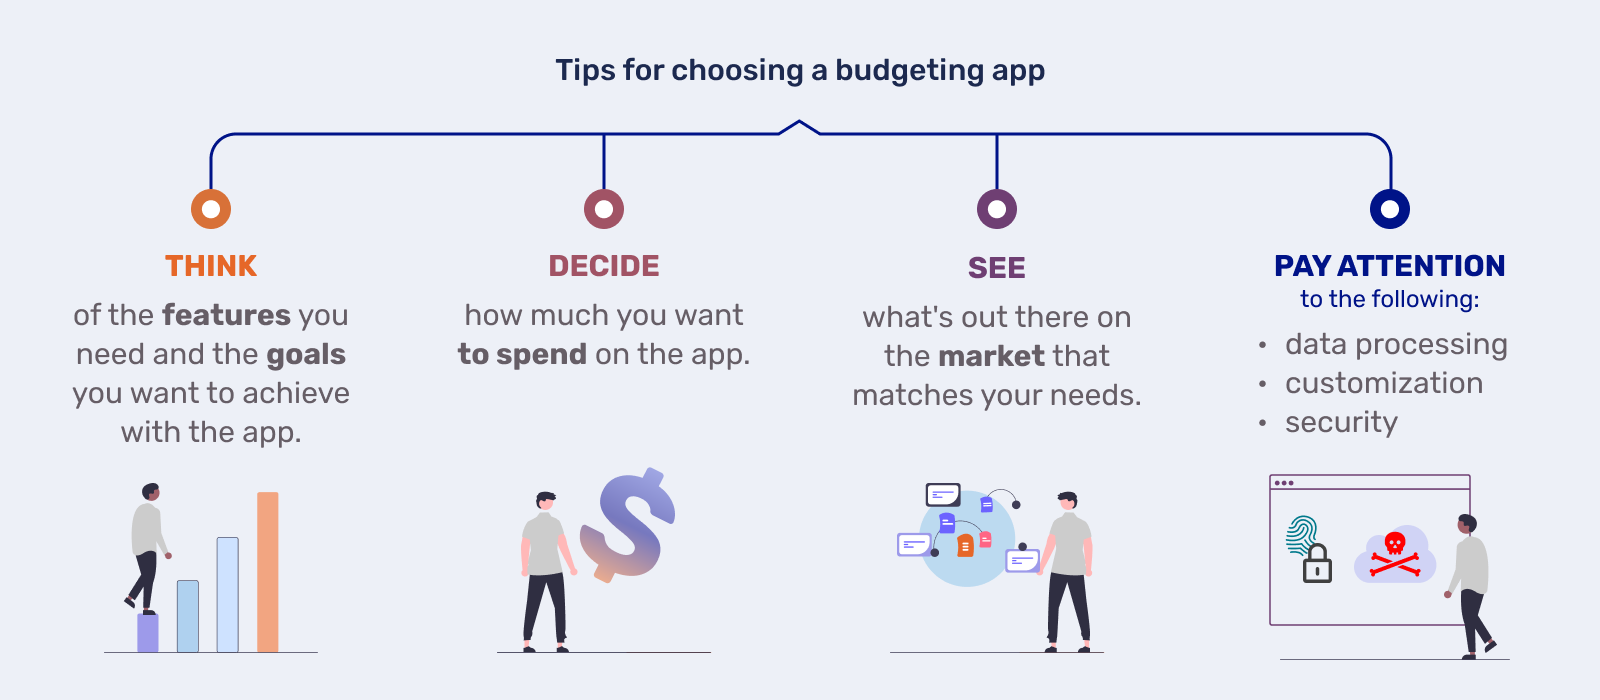 Tips for choosing a budgeting app